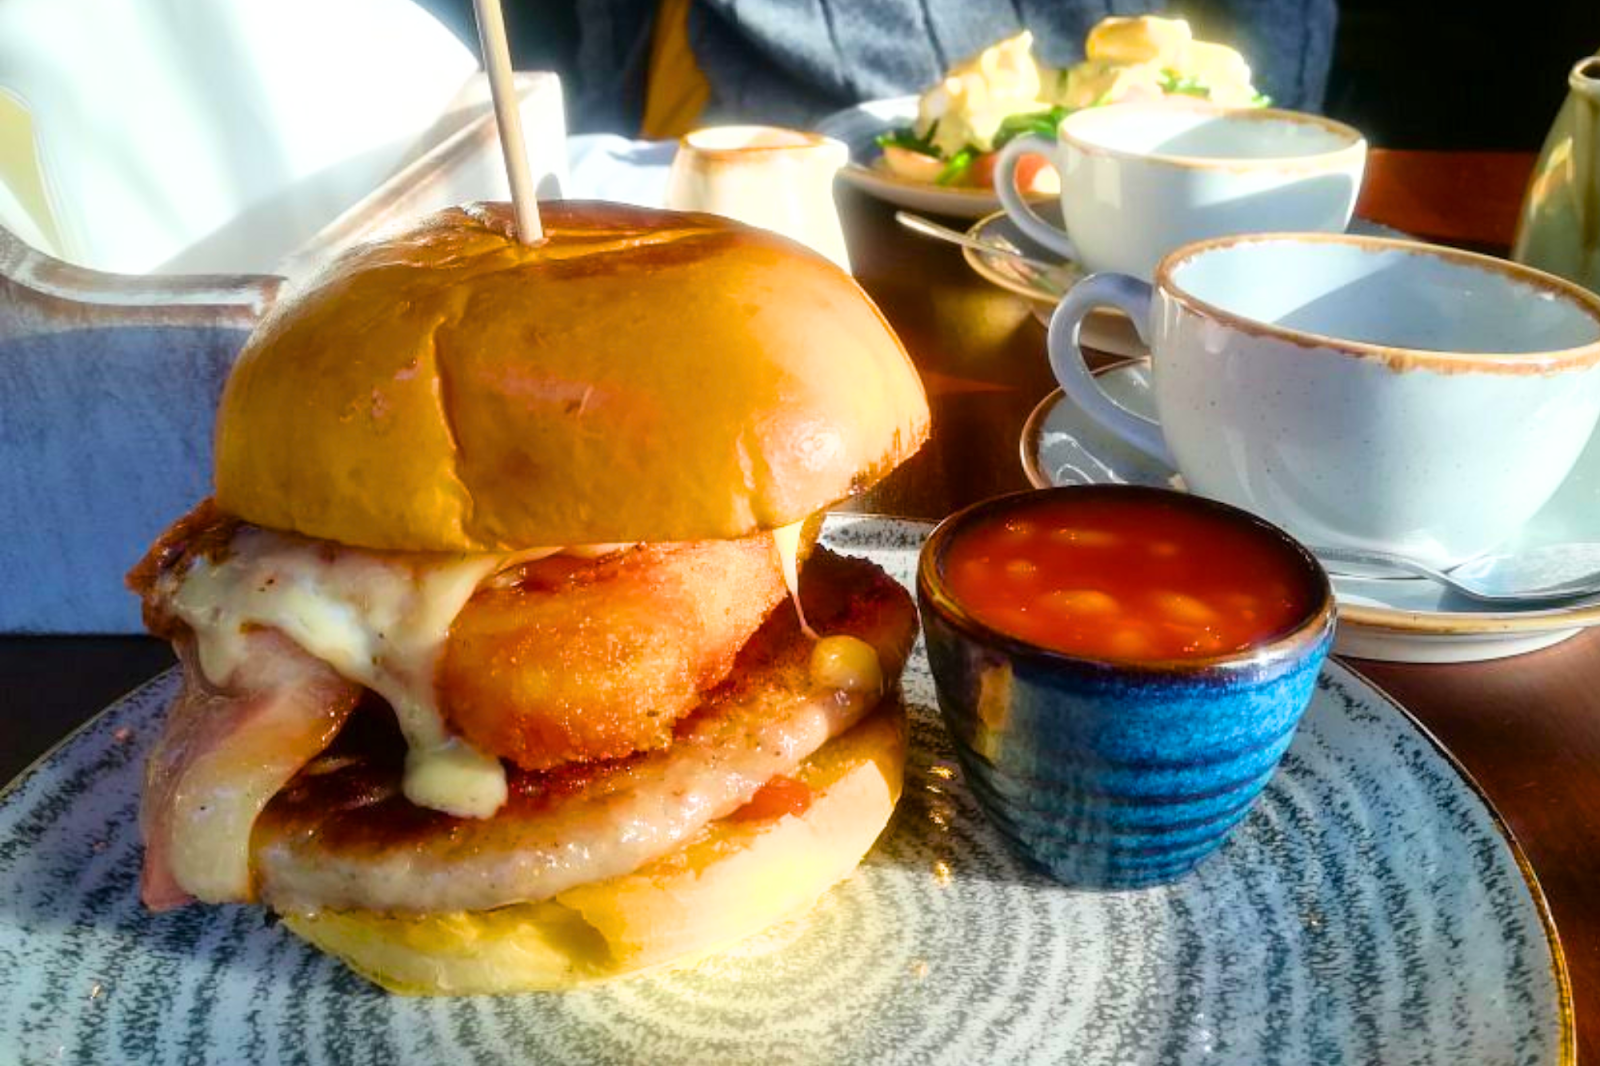 Try a breakfast burger at this breakfast location in Liverpool